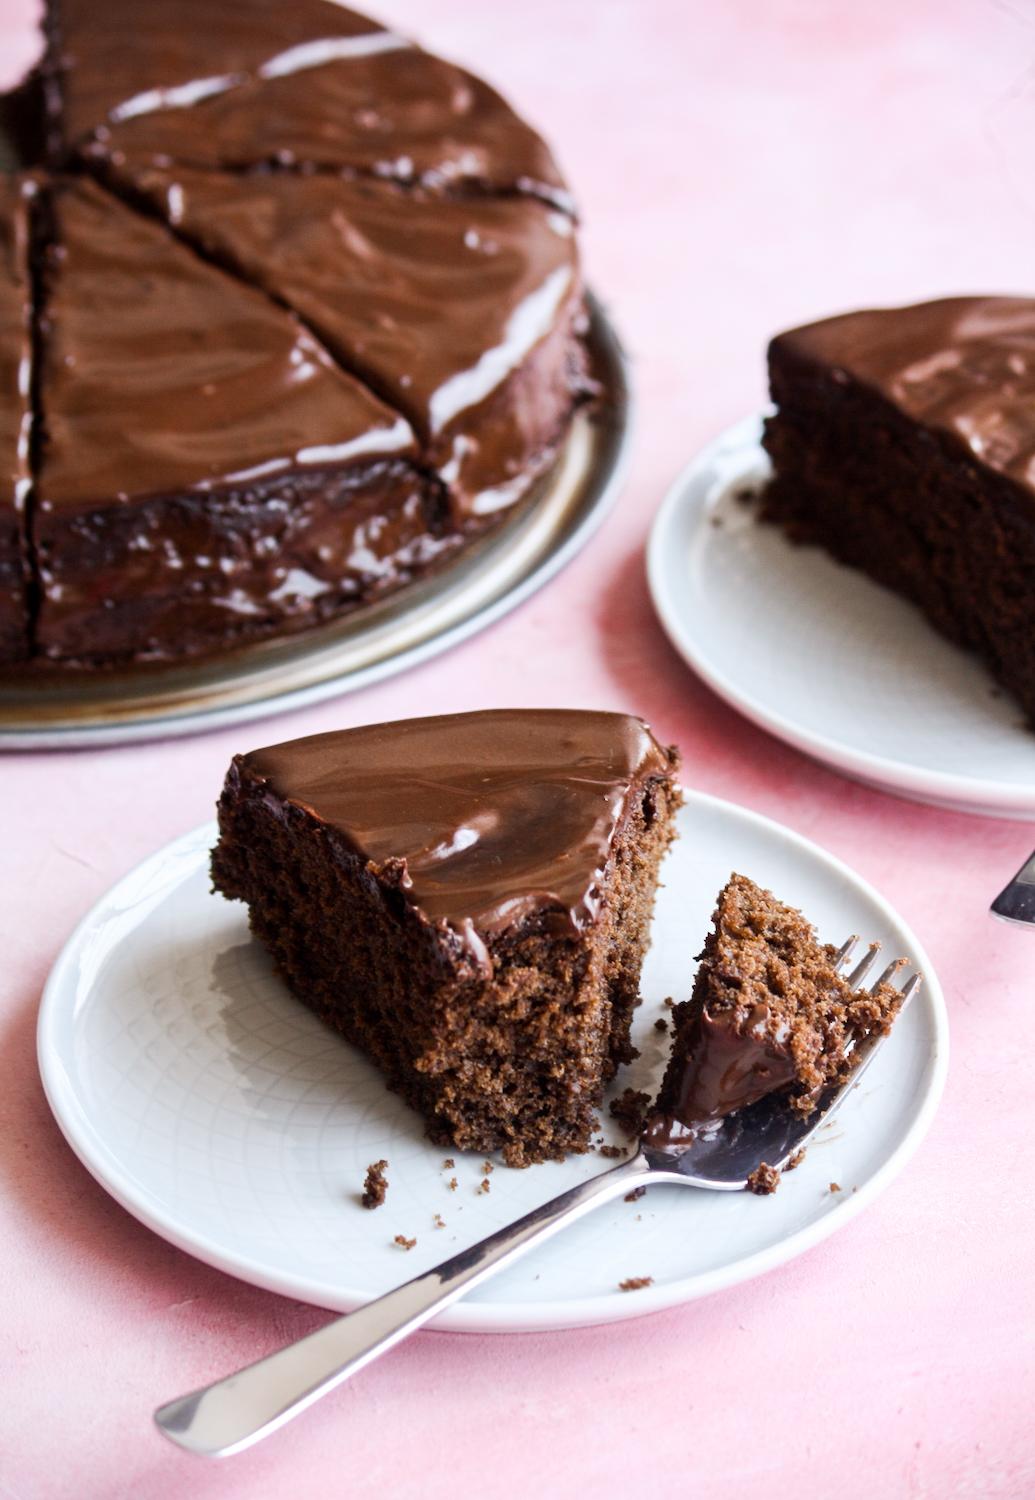  Satisfy your craving for a decadent dessert with this Chocolate Coffee Cake